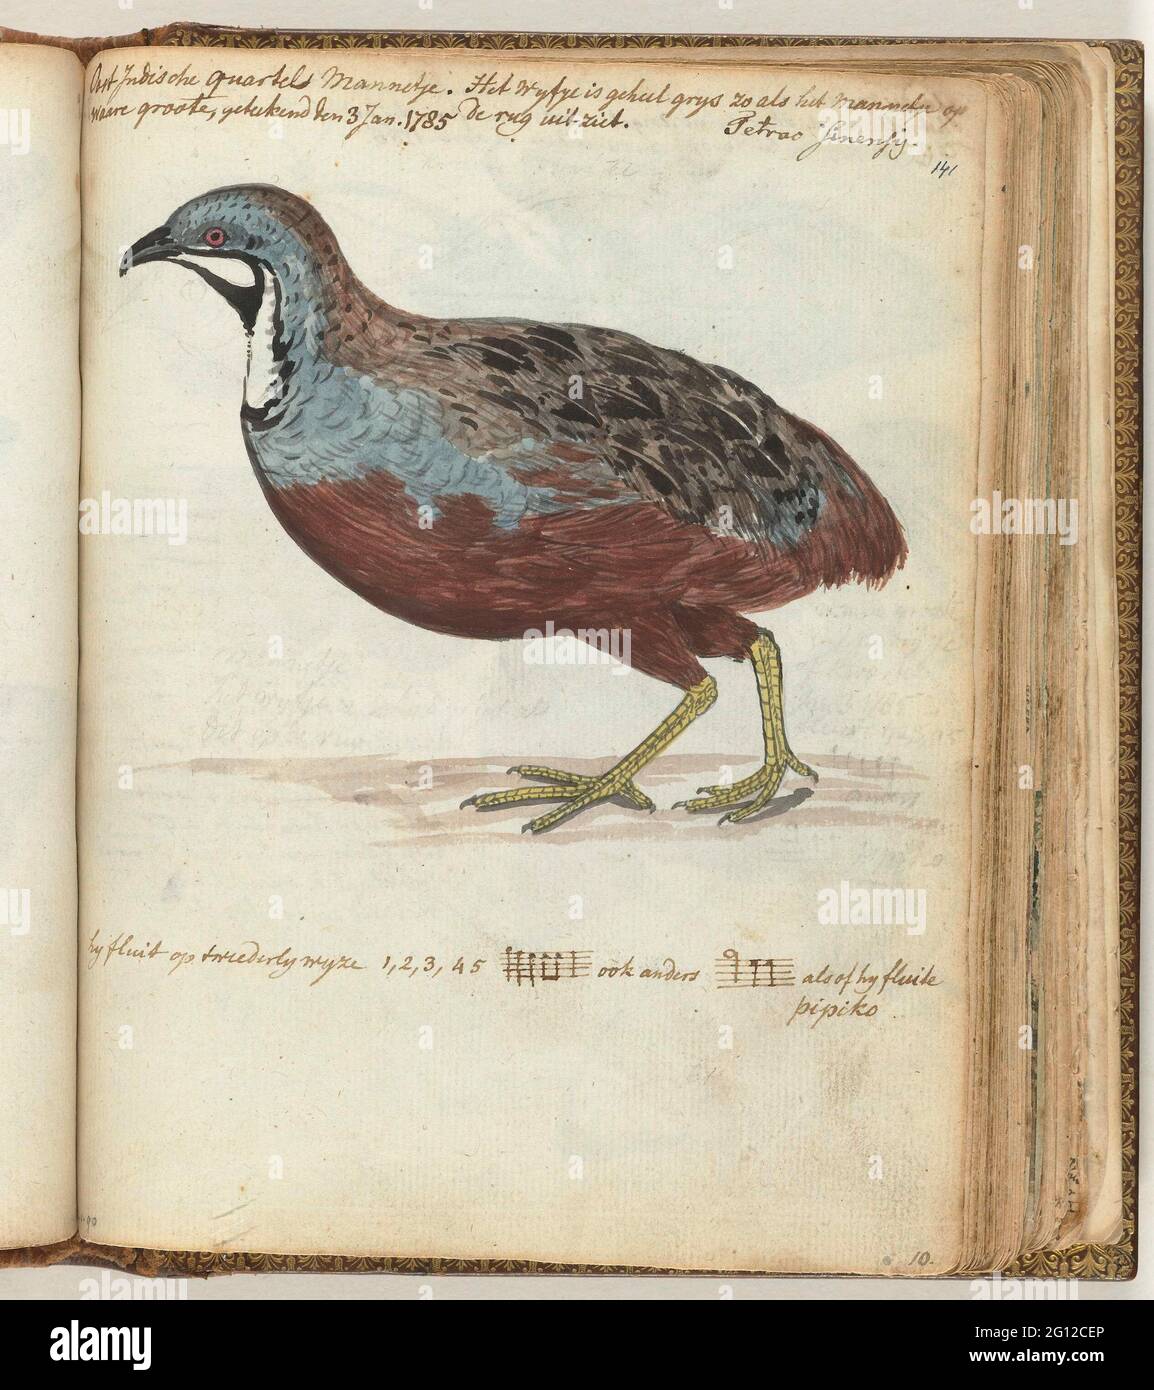 Blue-breasted quail. Color drawing of a male quartel, side view. With inscription, among other things, about the way of flutes of the quail. Part from Jan Brandes, DL sketchbook. 1 (1808), p. 141. Stock Photo